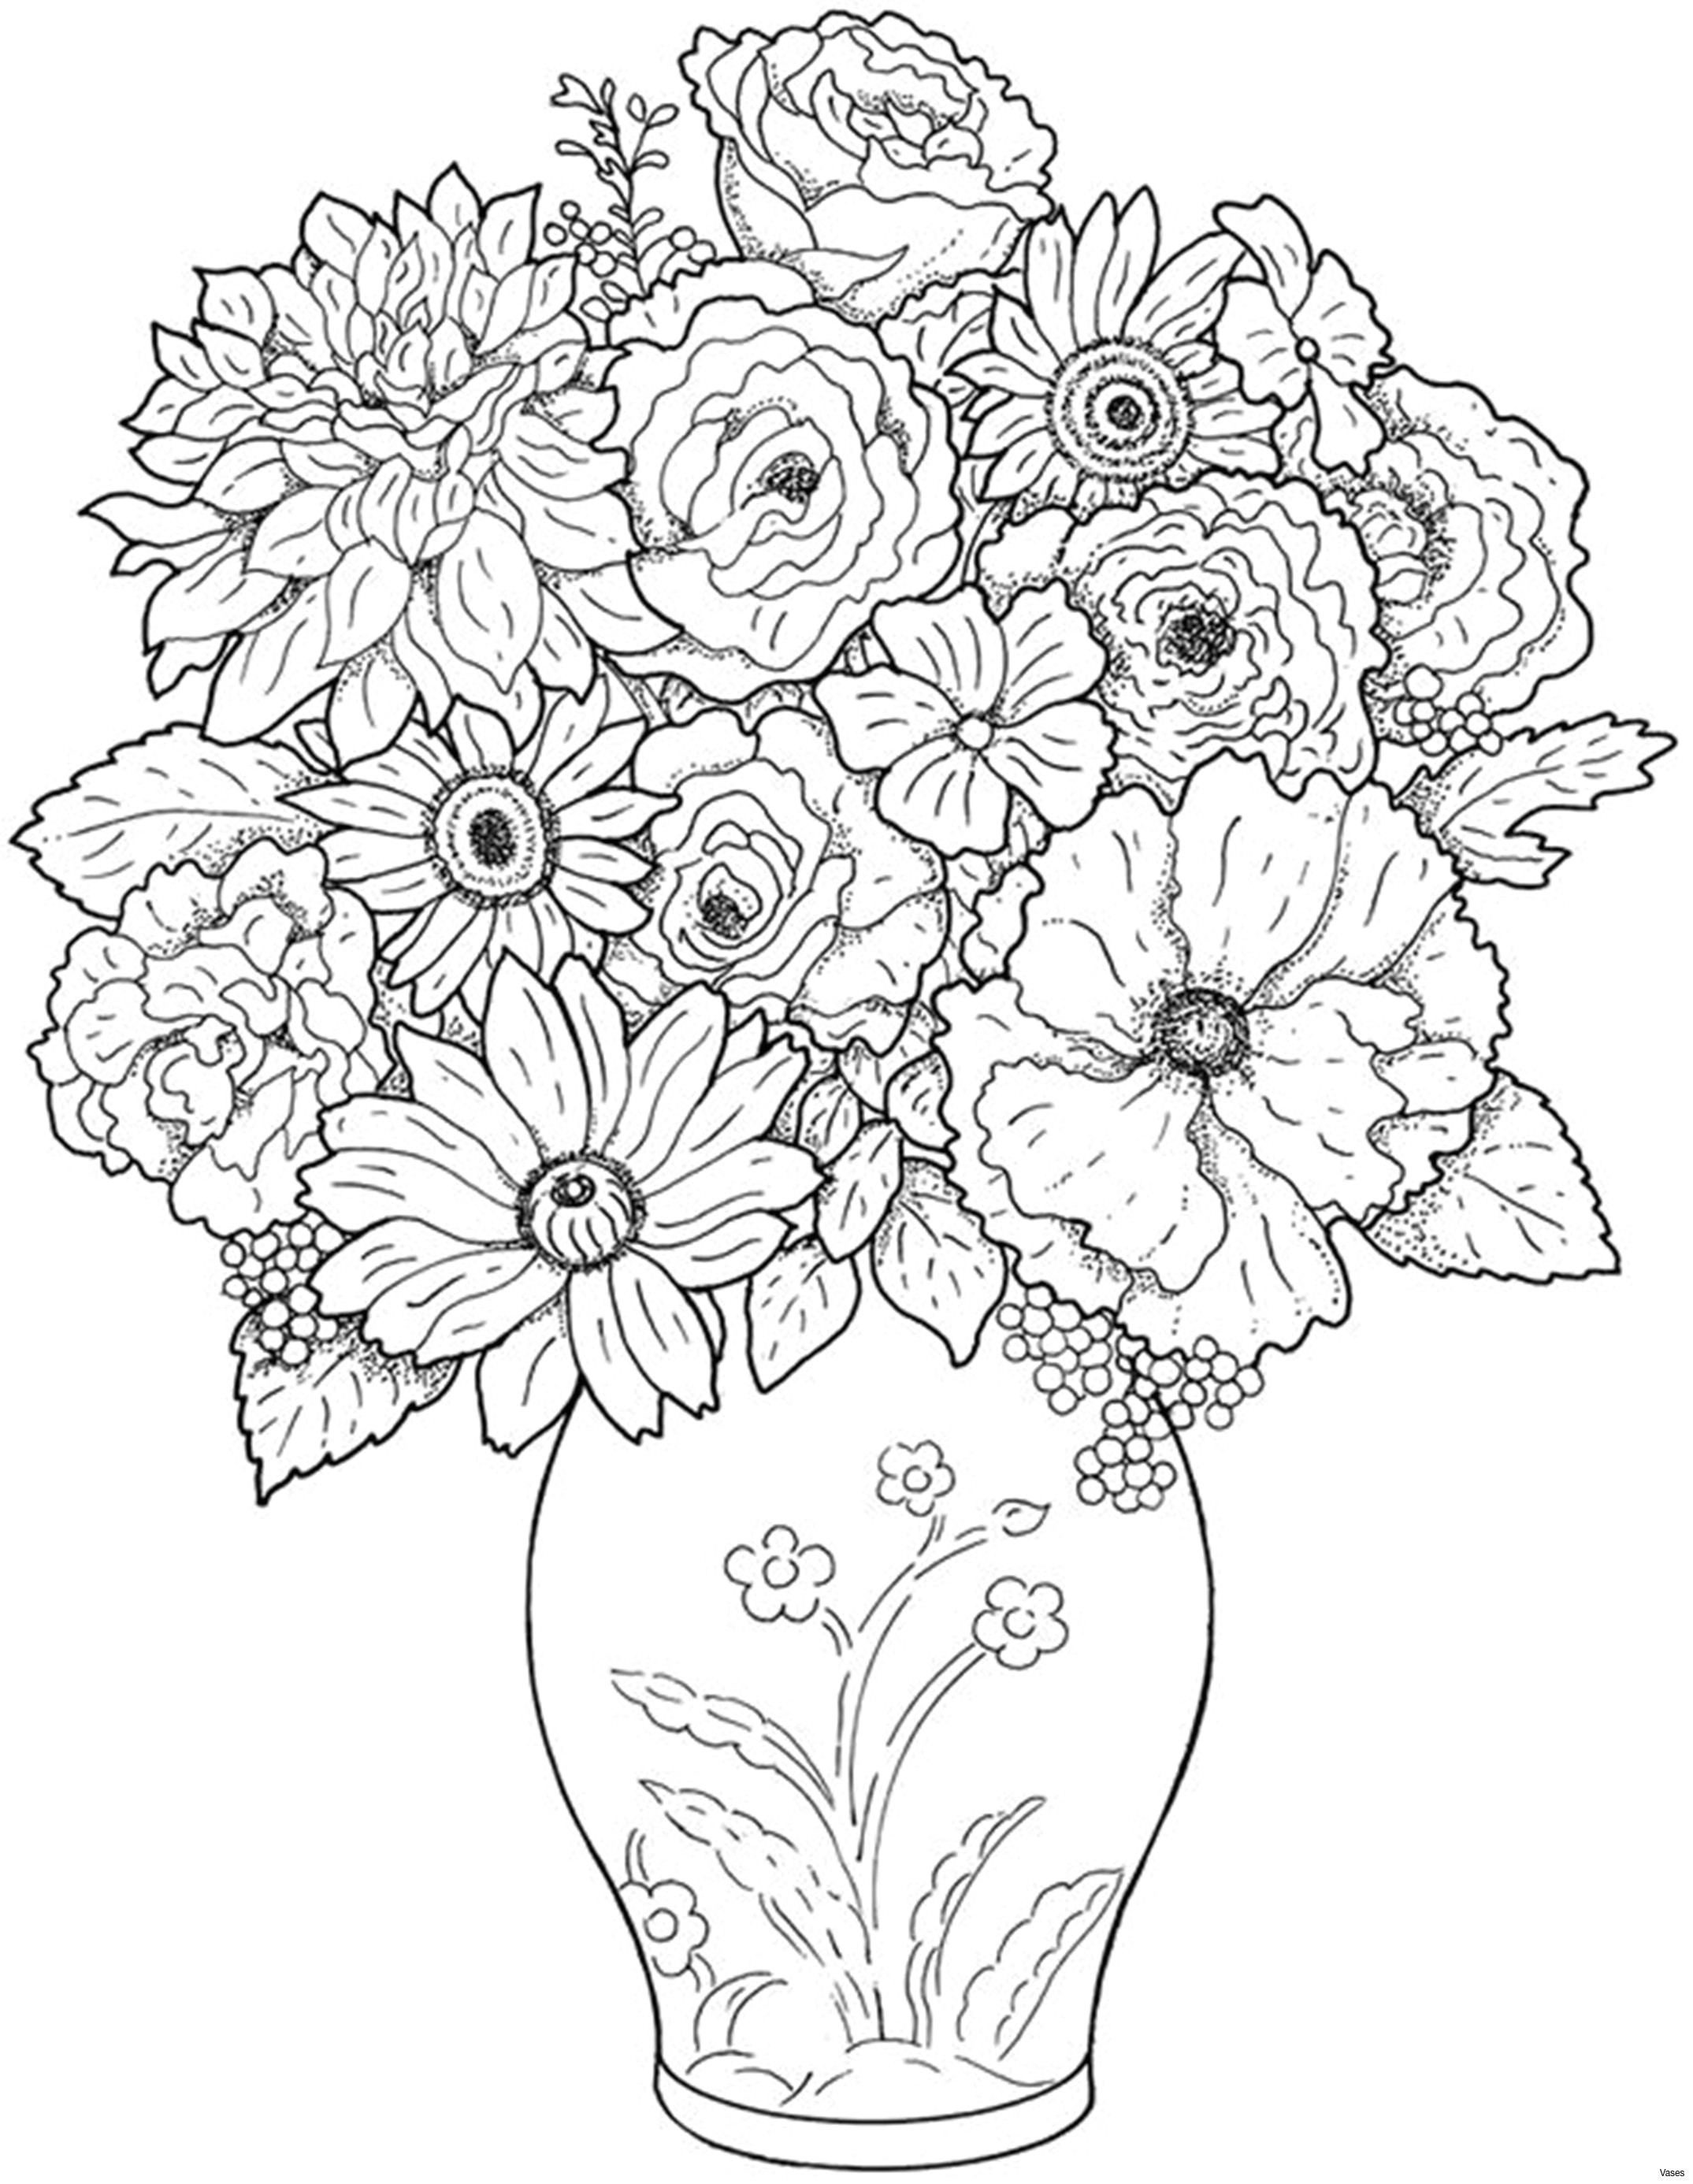 Drawing Of Flower Petals Www Colouring Pages Aua Ergewohnliche Cool Vases Flower Vase Coloring